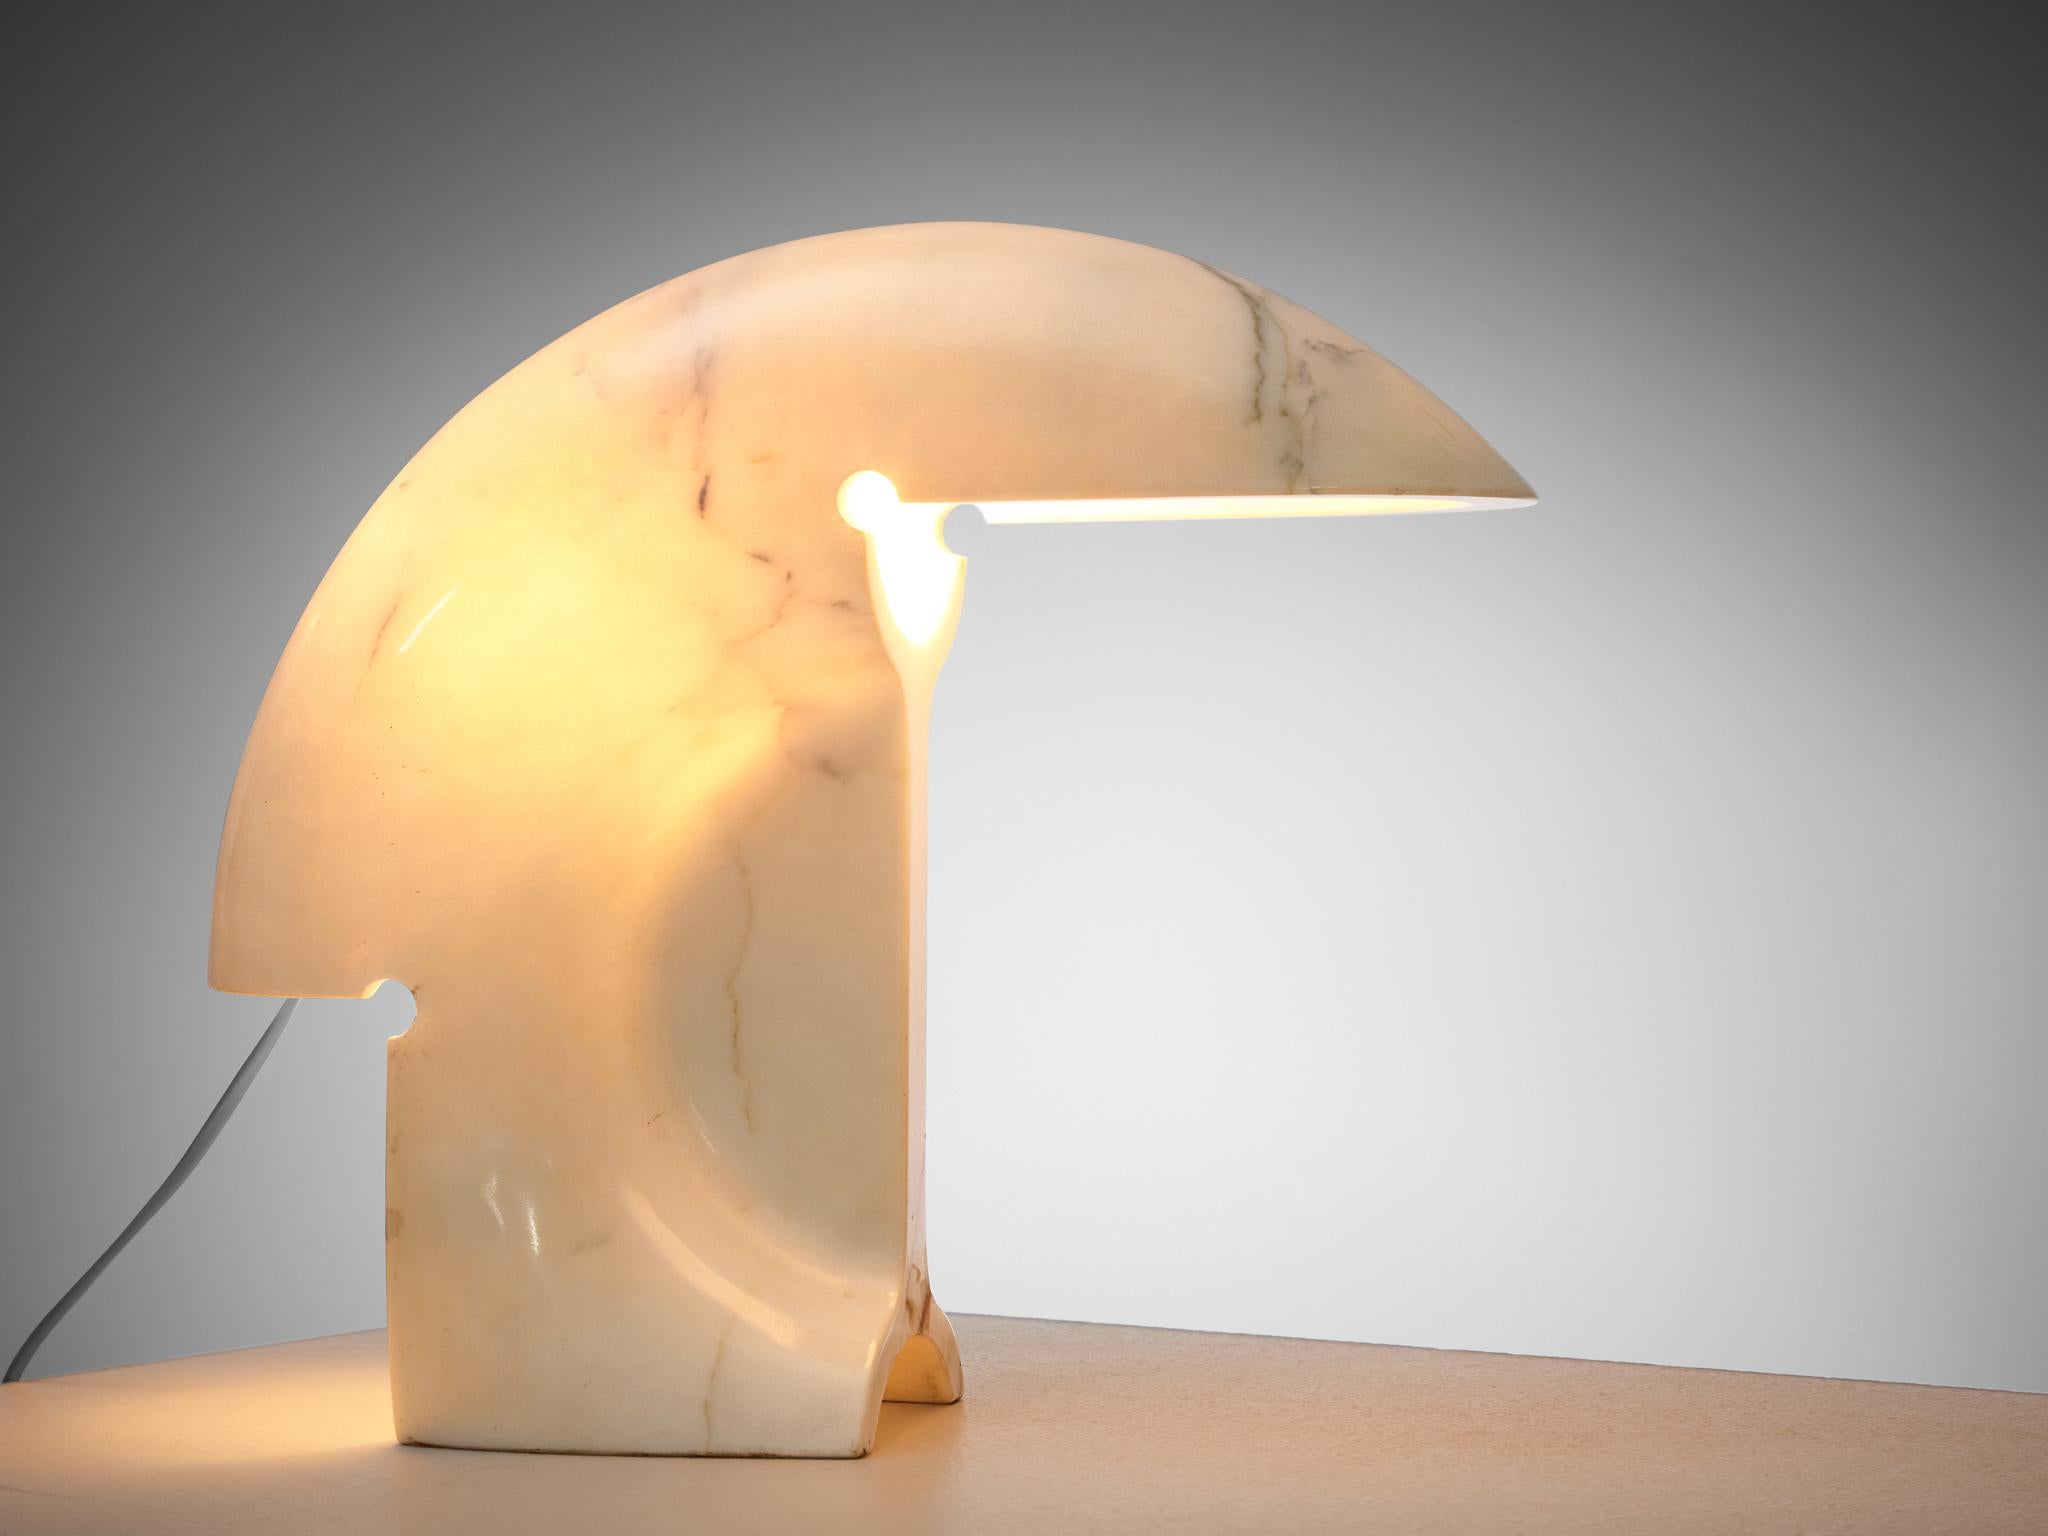 Tobia Scarpa for Flos, 'Biagio' table lamp, marble, Italy.

Exquisite table lamp designed by Tobia Scarpa for Flos in circa 1968. This model table lamp is especially notable since it is made out of one piece Carrara marble. A sculptural piece that